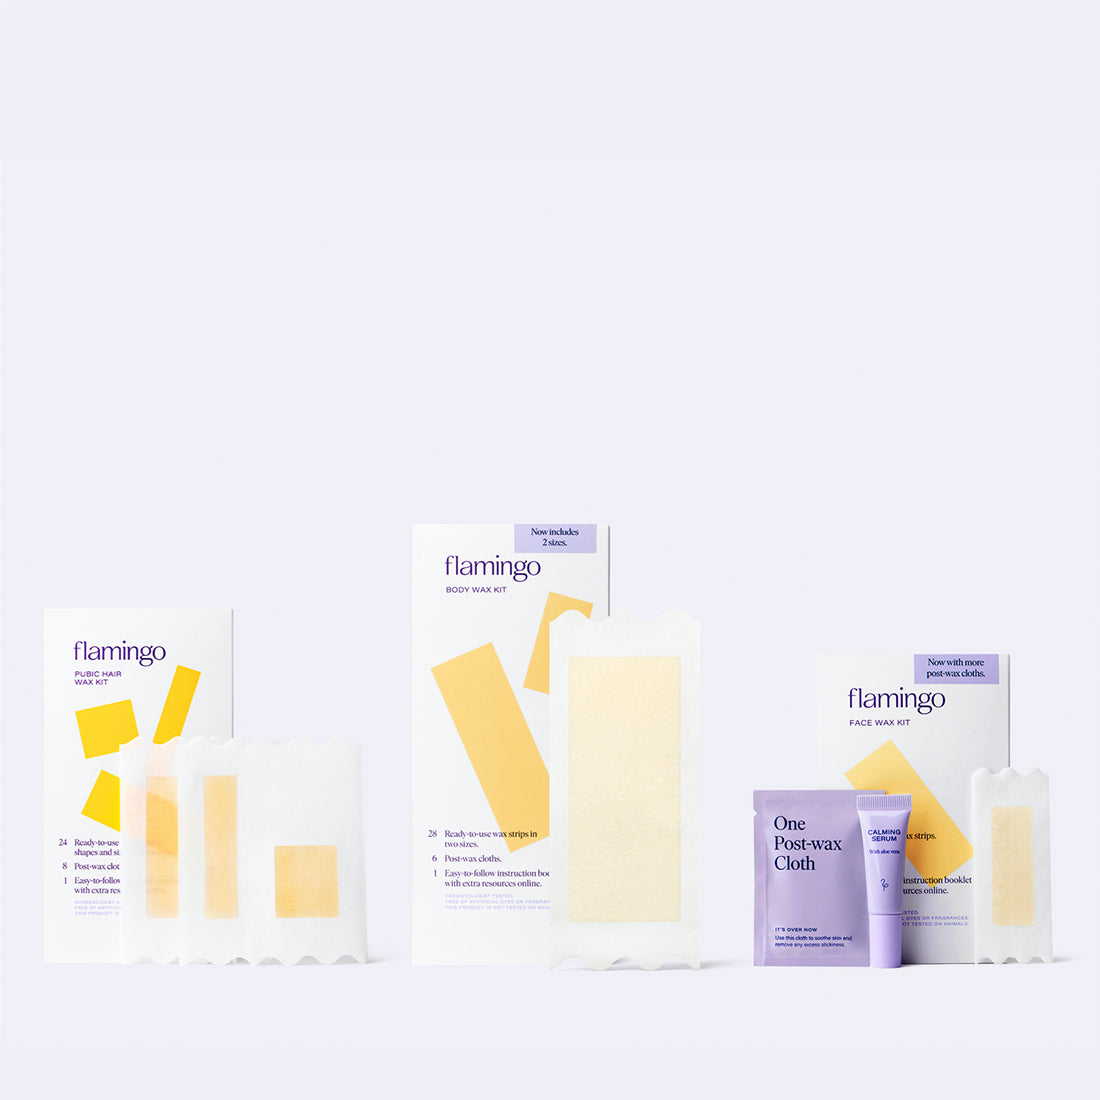 Flamingo Wax Trio featuring the Body, Face, and Pubic Wax Kits with wax strips shown alongside the post-wax cloth and calming serum